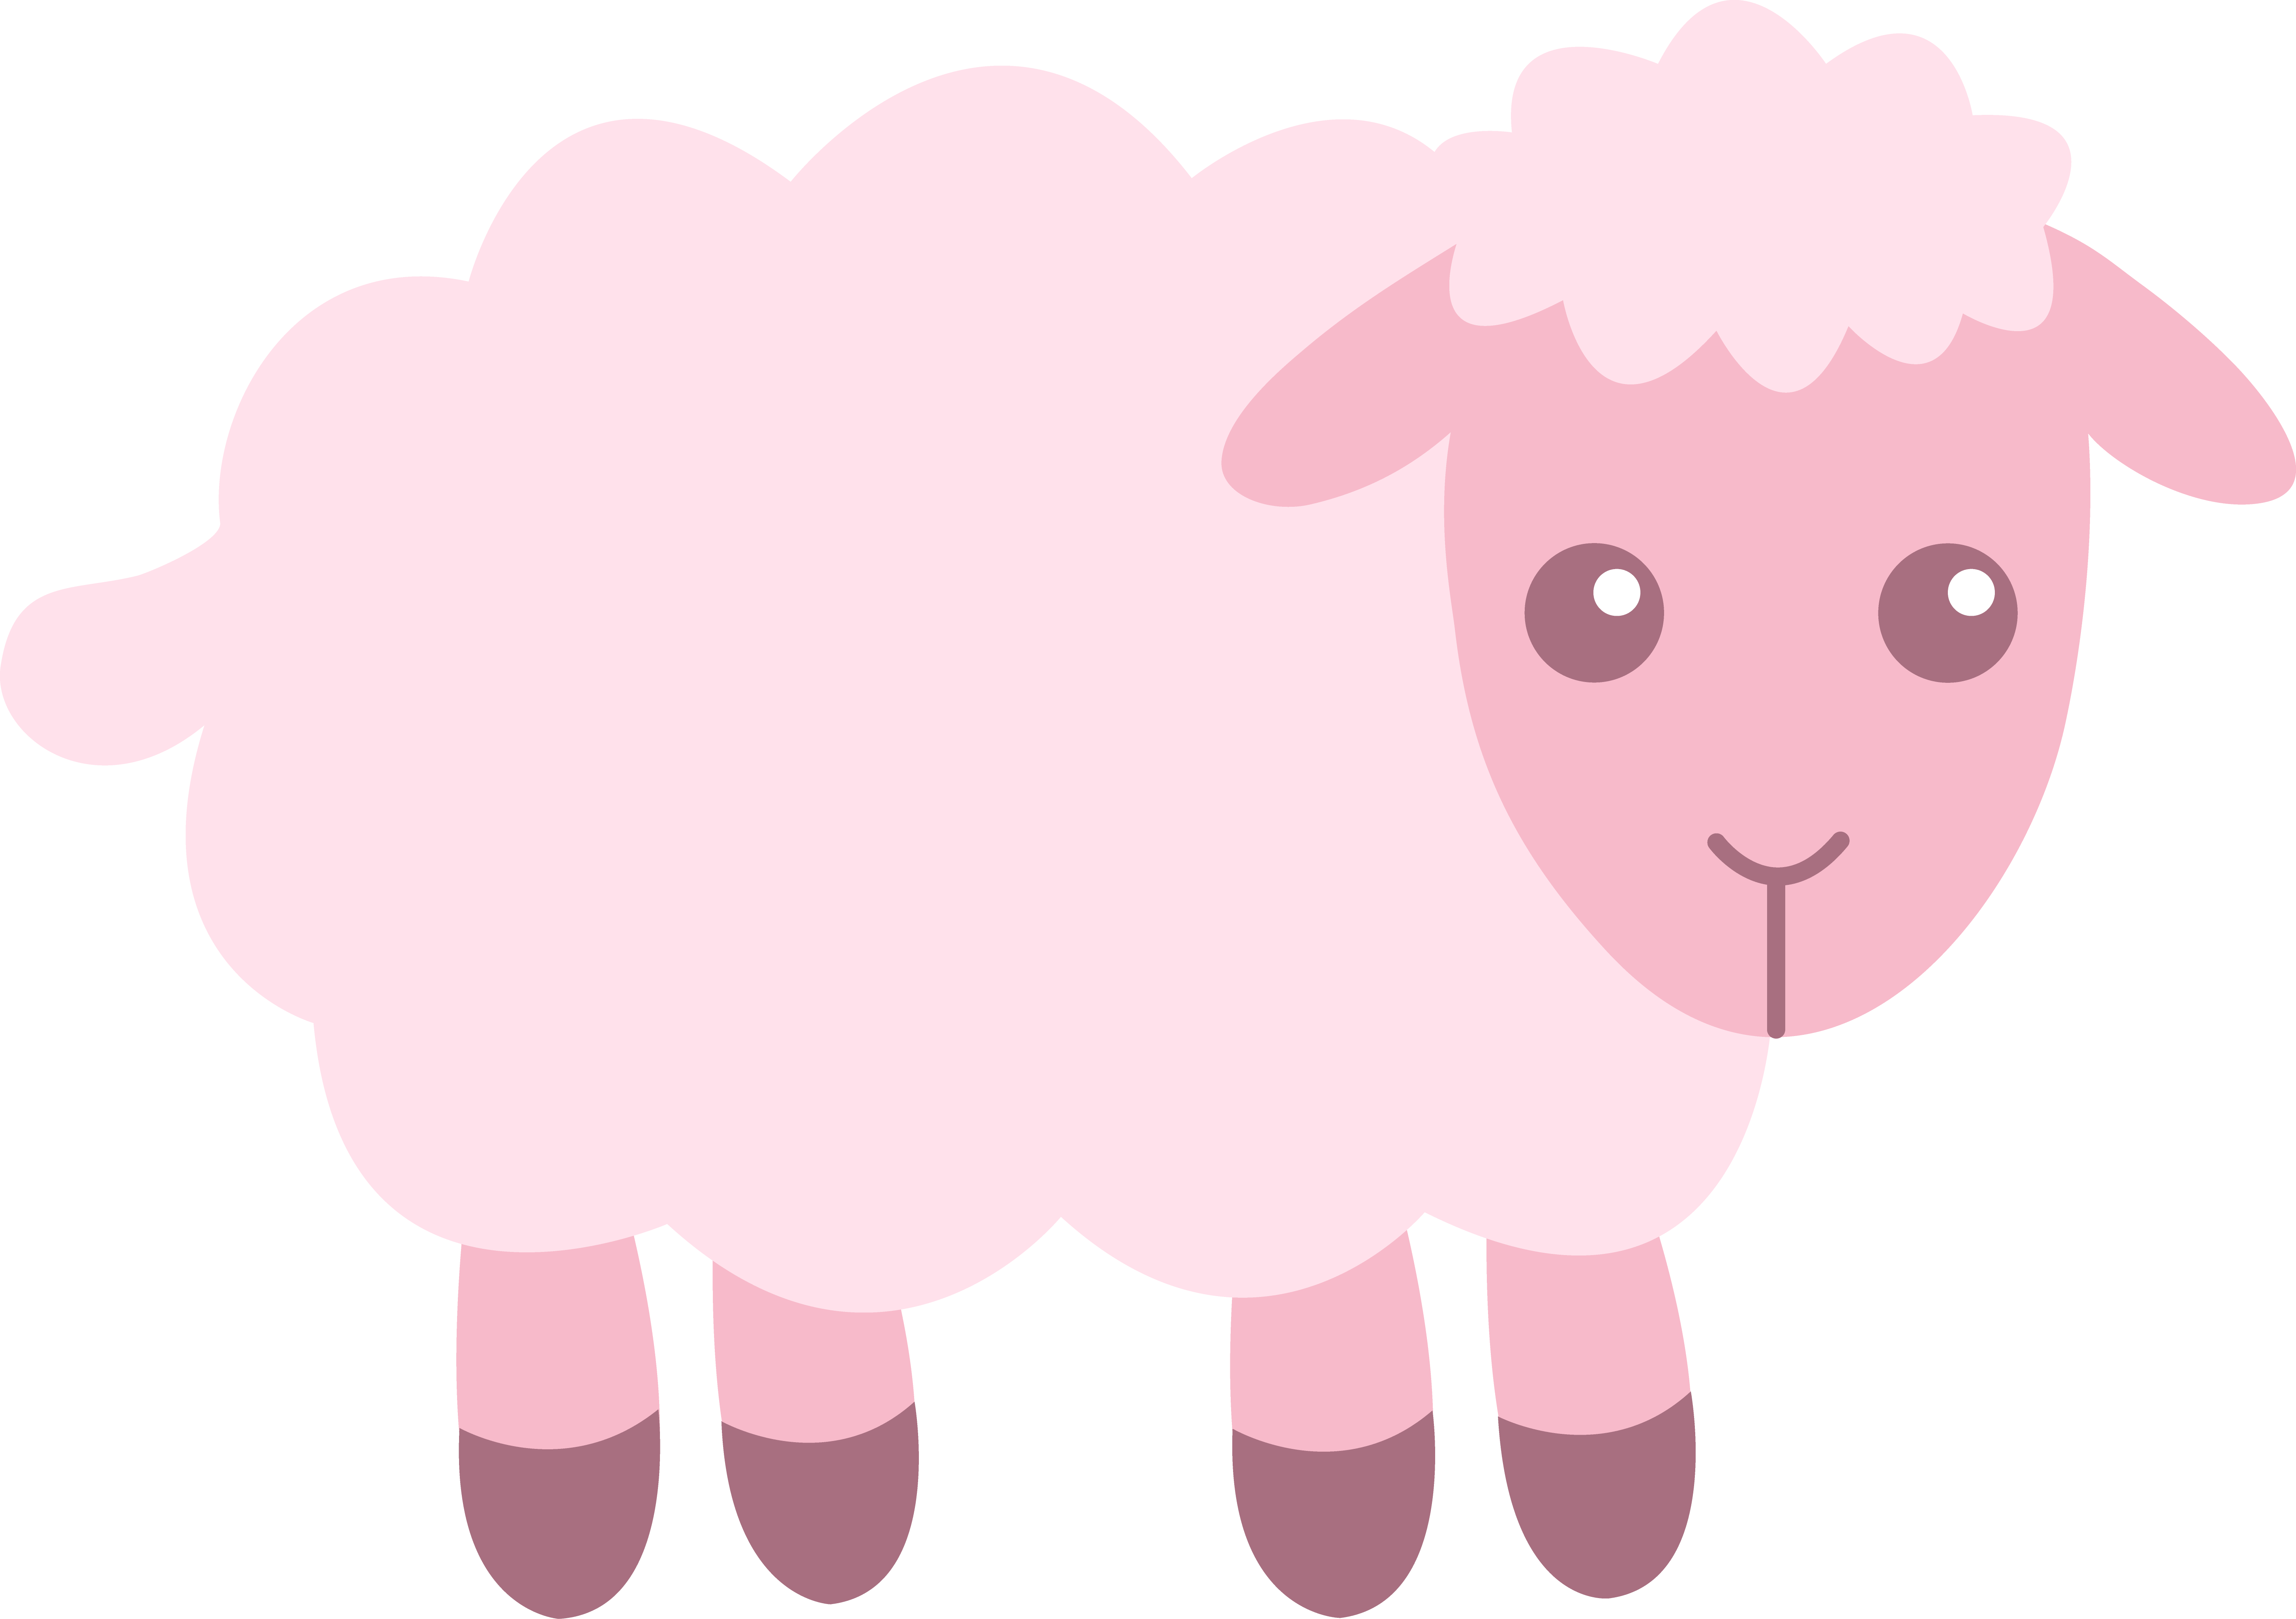 Clothespin clipart baby shower. Photo cute pink sheep